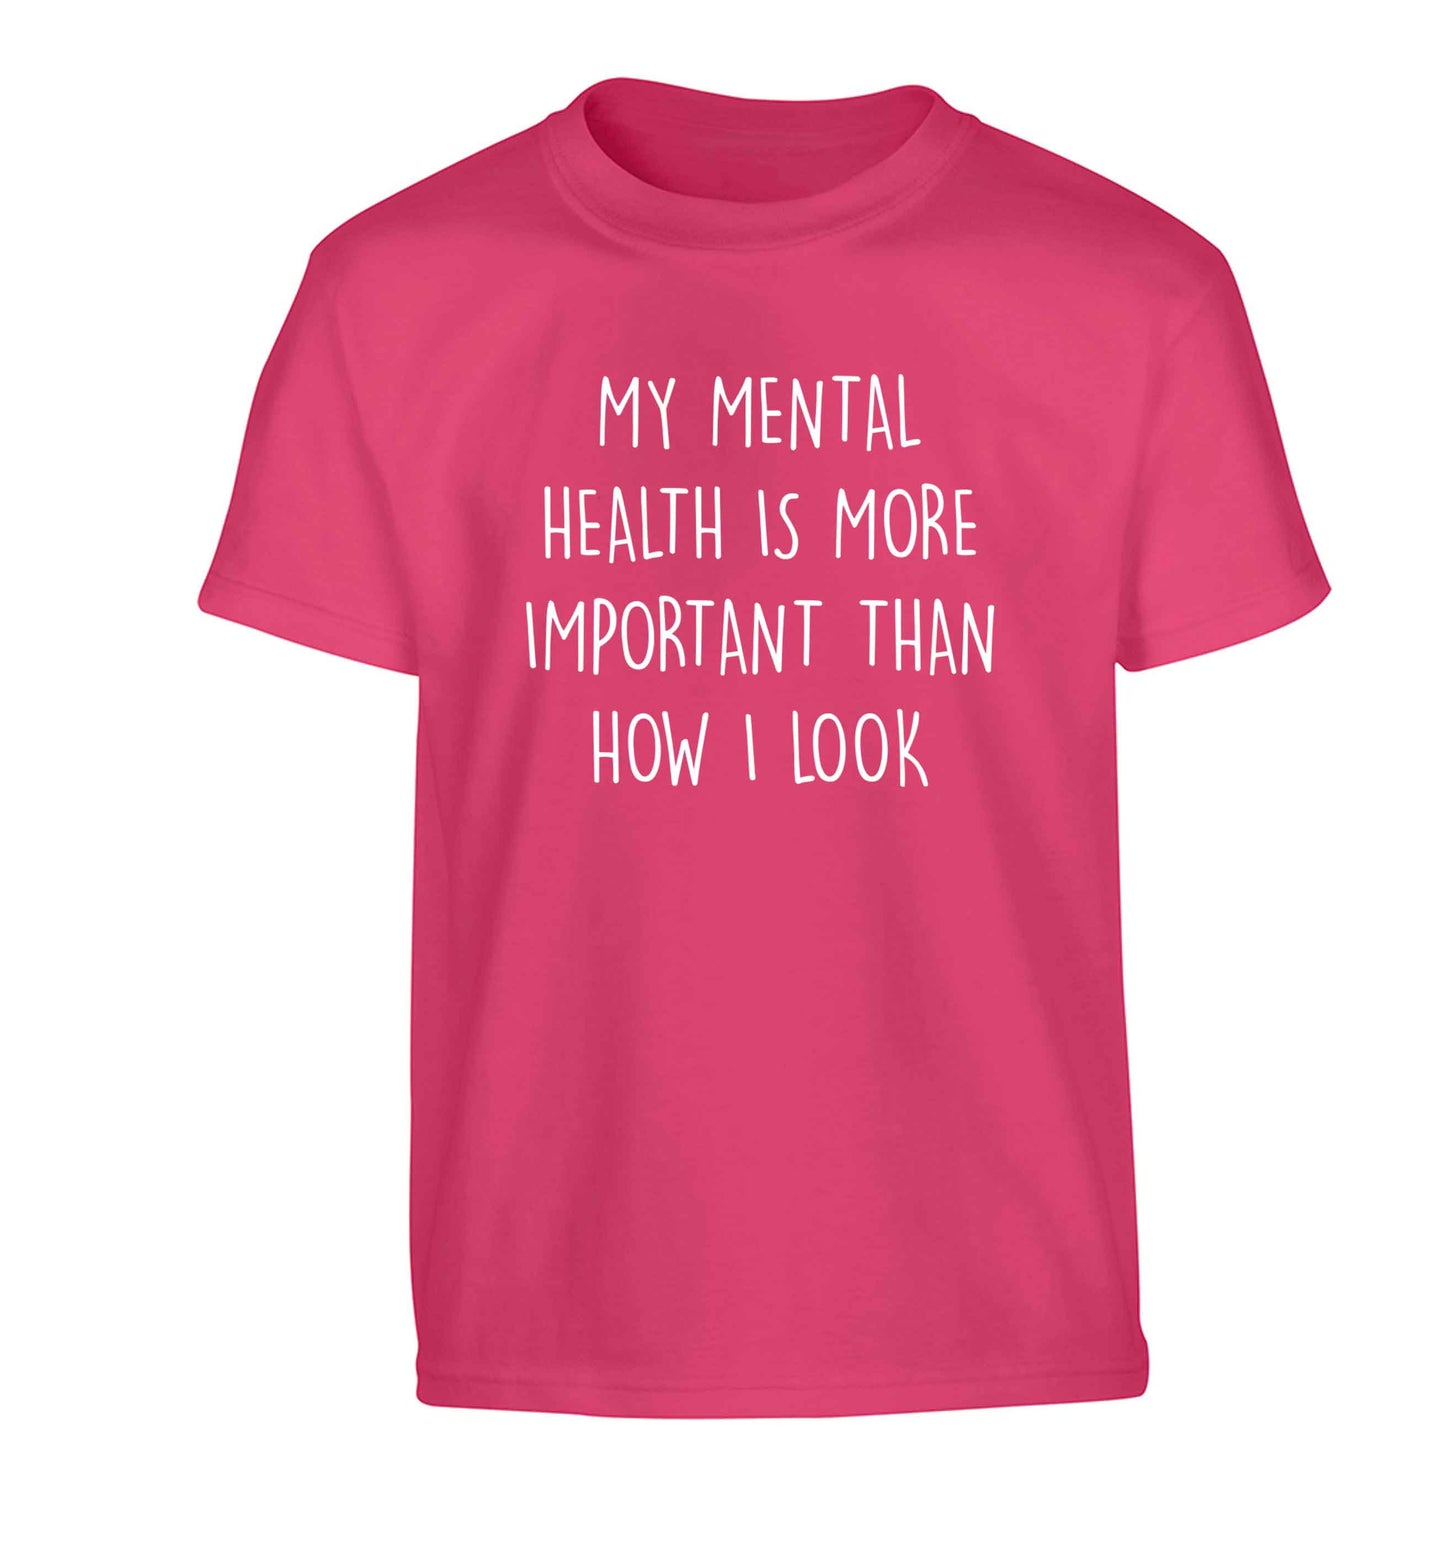 My mental health is more importnat than how I look Children's pink Tshirt 12-13 Years